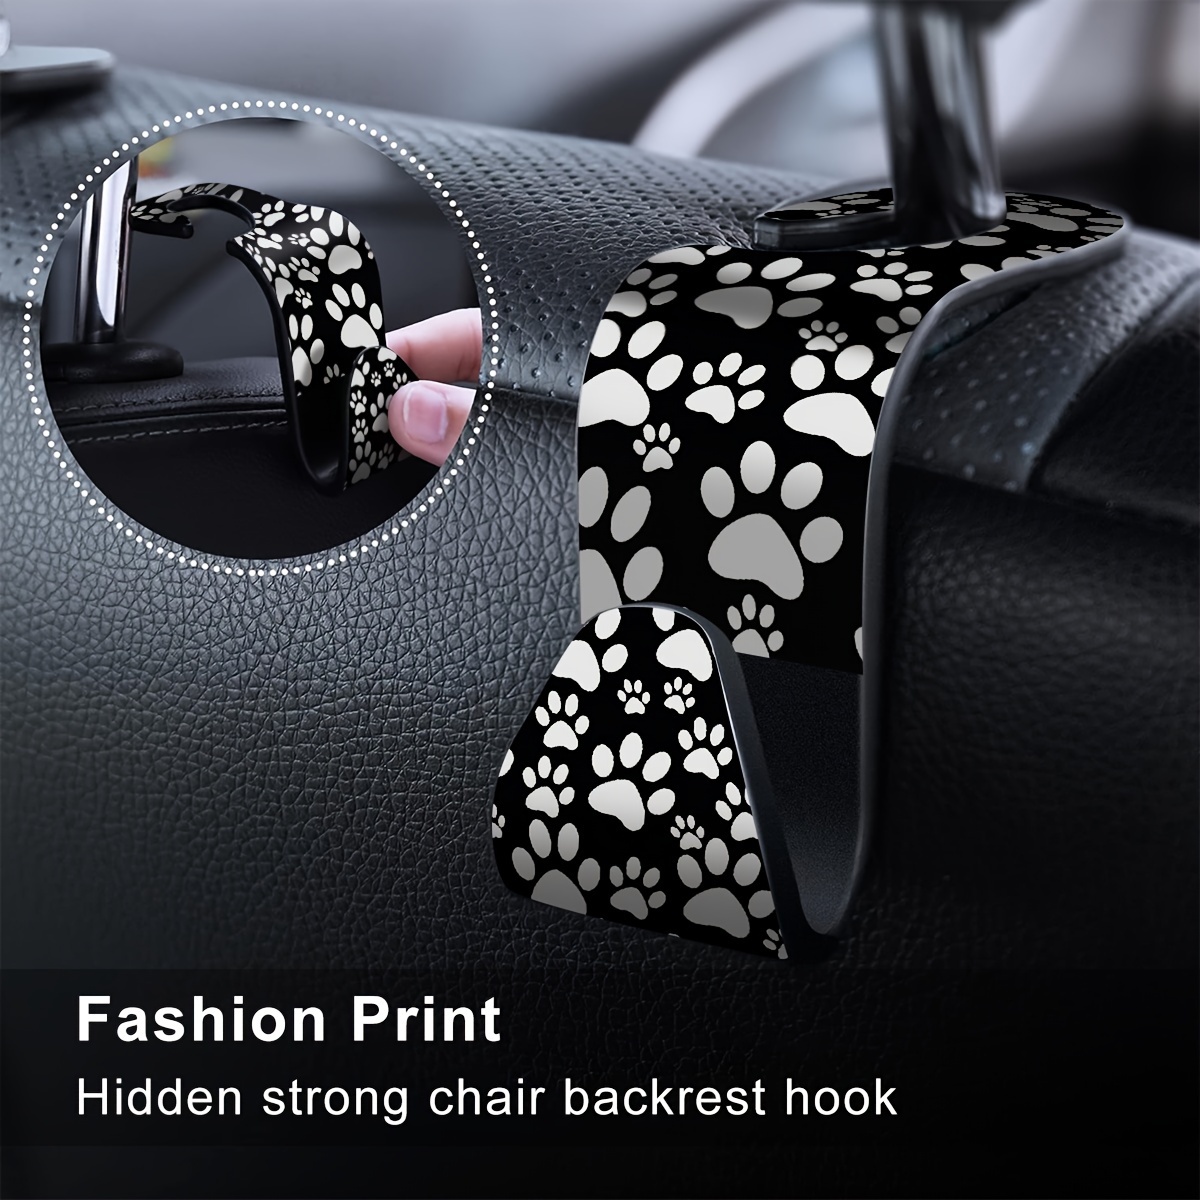 

2pcs Paw Printed Fashionable Hooks, Car Rear Seat Hooks, Multifunctional Car Headrest Hanging Storage Hooks, Car Interior Accessories, Easy To Install